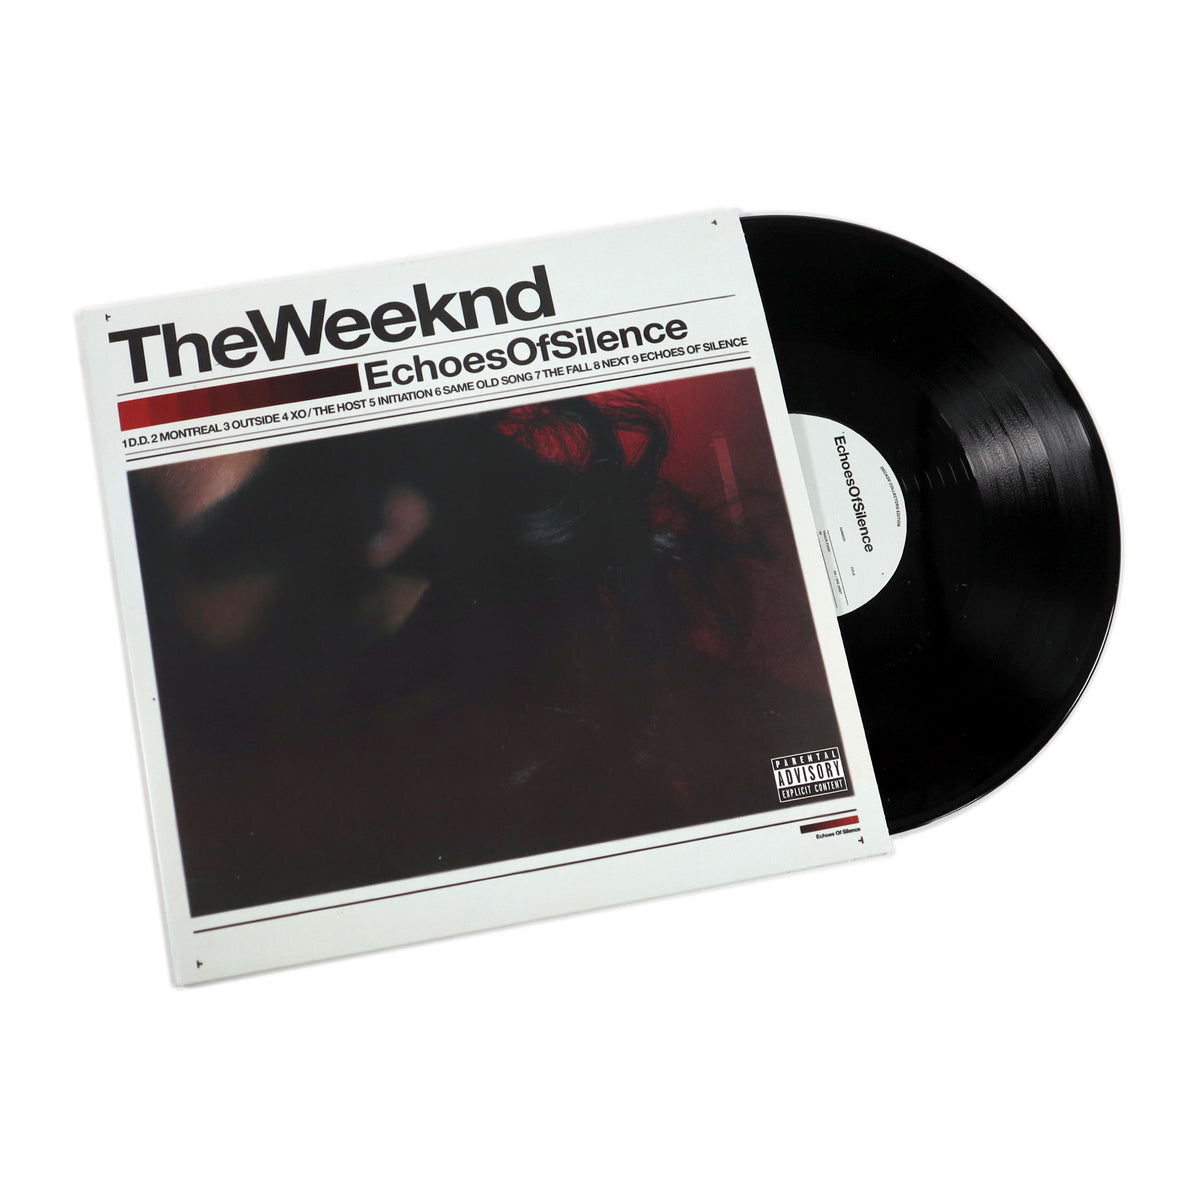 The Weeknd: Echoes Of Silence - Decade Edition Vinyl 2LP —